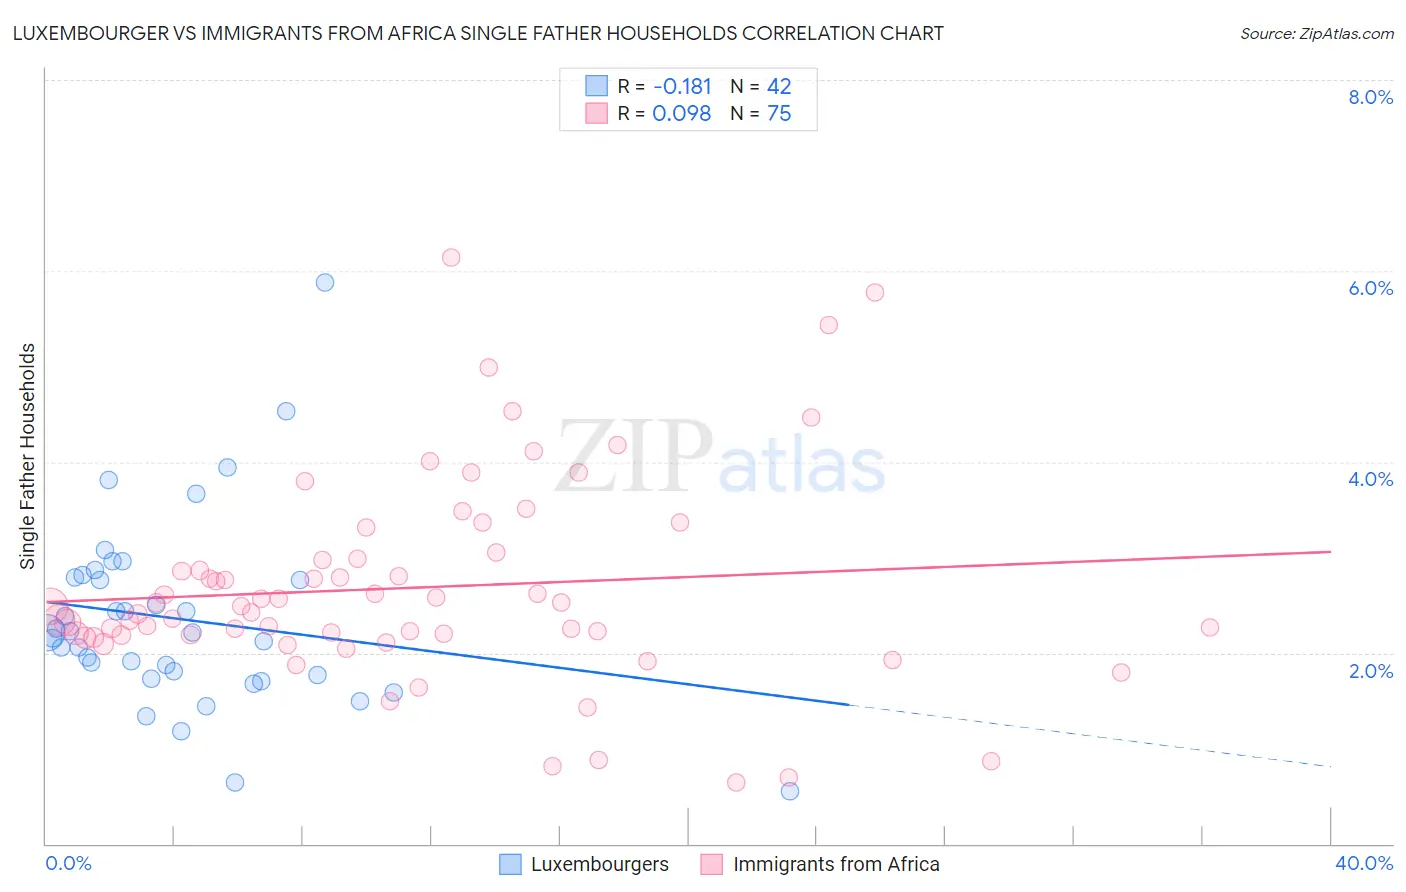 Luxembourger vs Immigrants from Africa Single Father Households